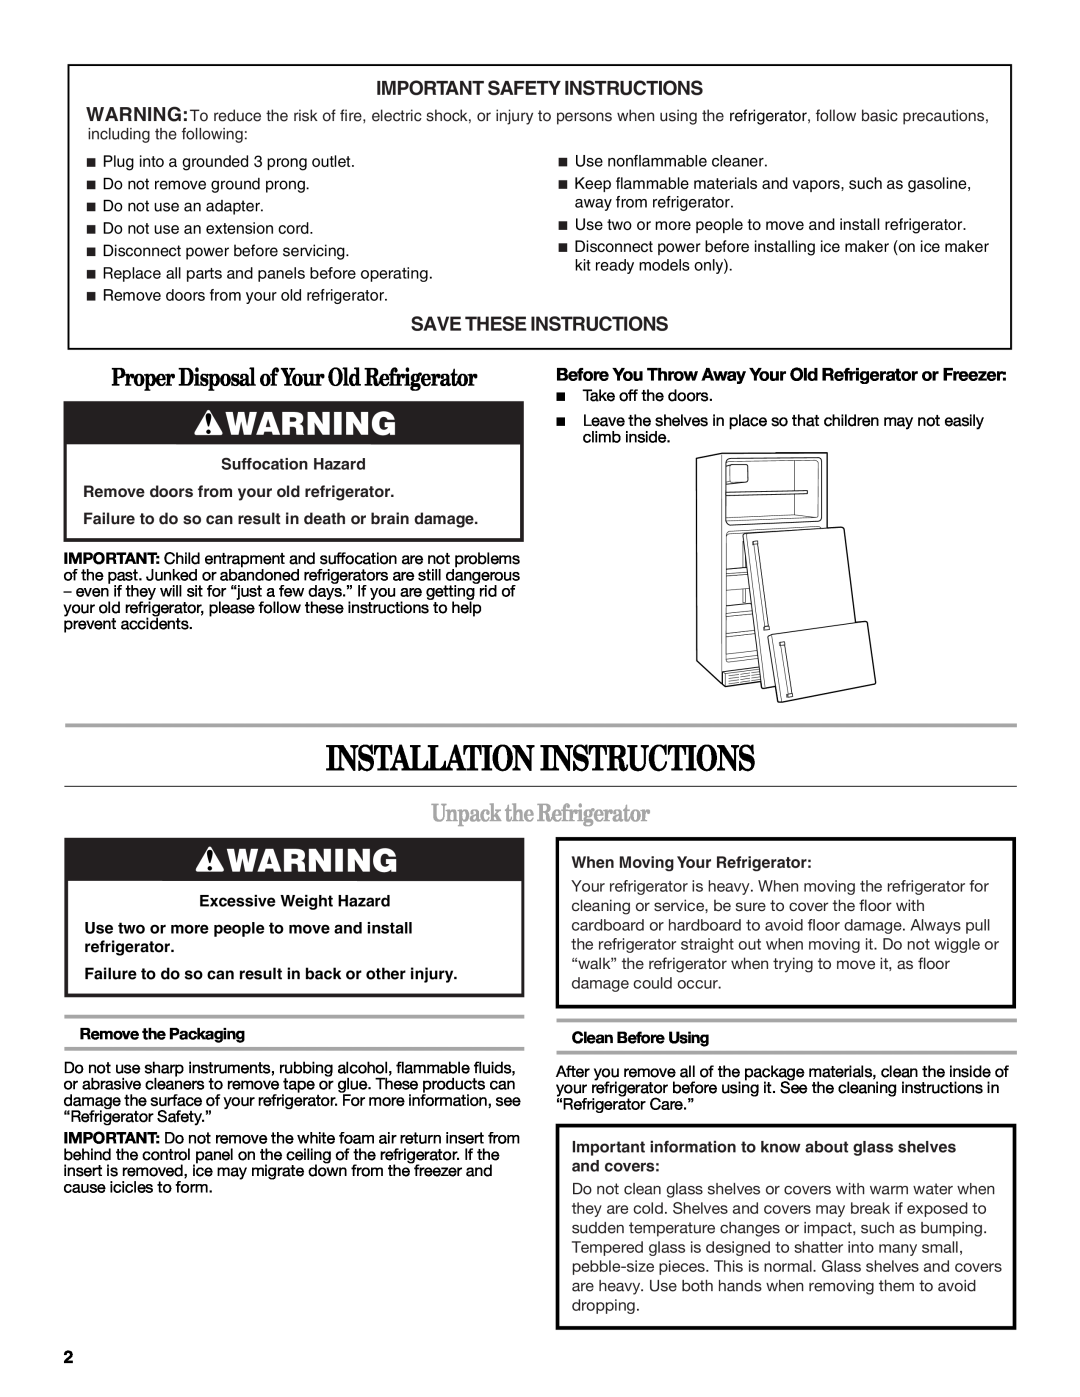 Whirlpool W10315410A Installation Instructions, Unpack the Refrigerator, Important Safety Instructions, Suffocation Hazard 